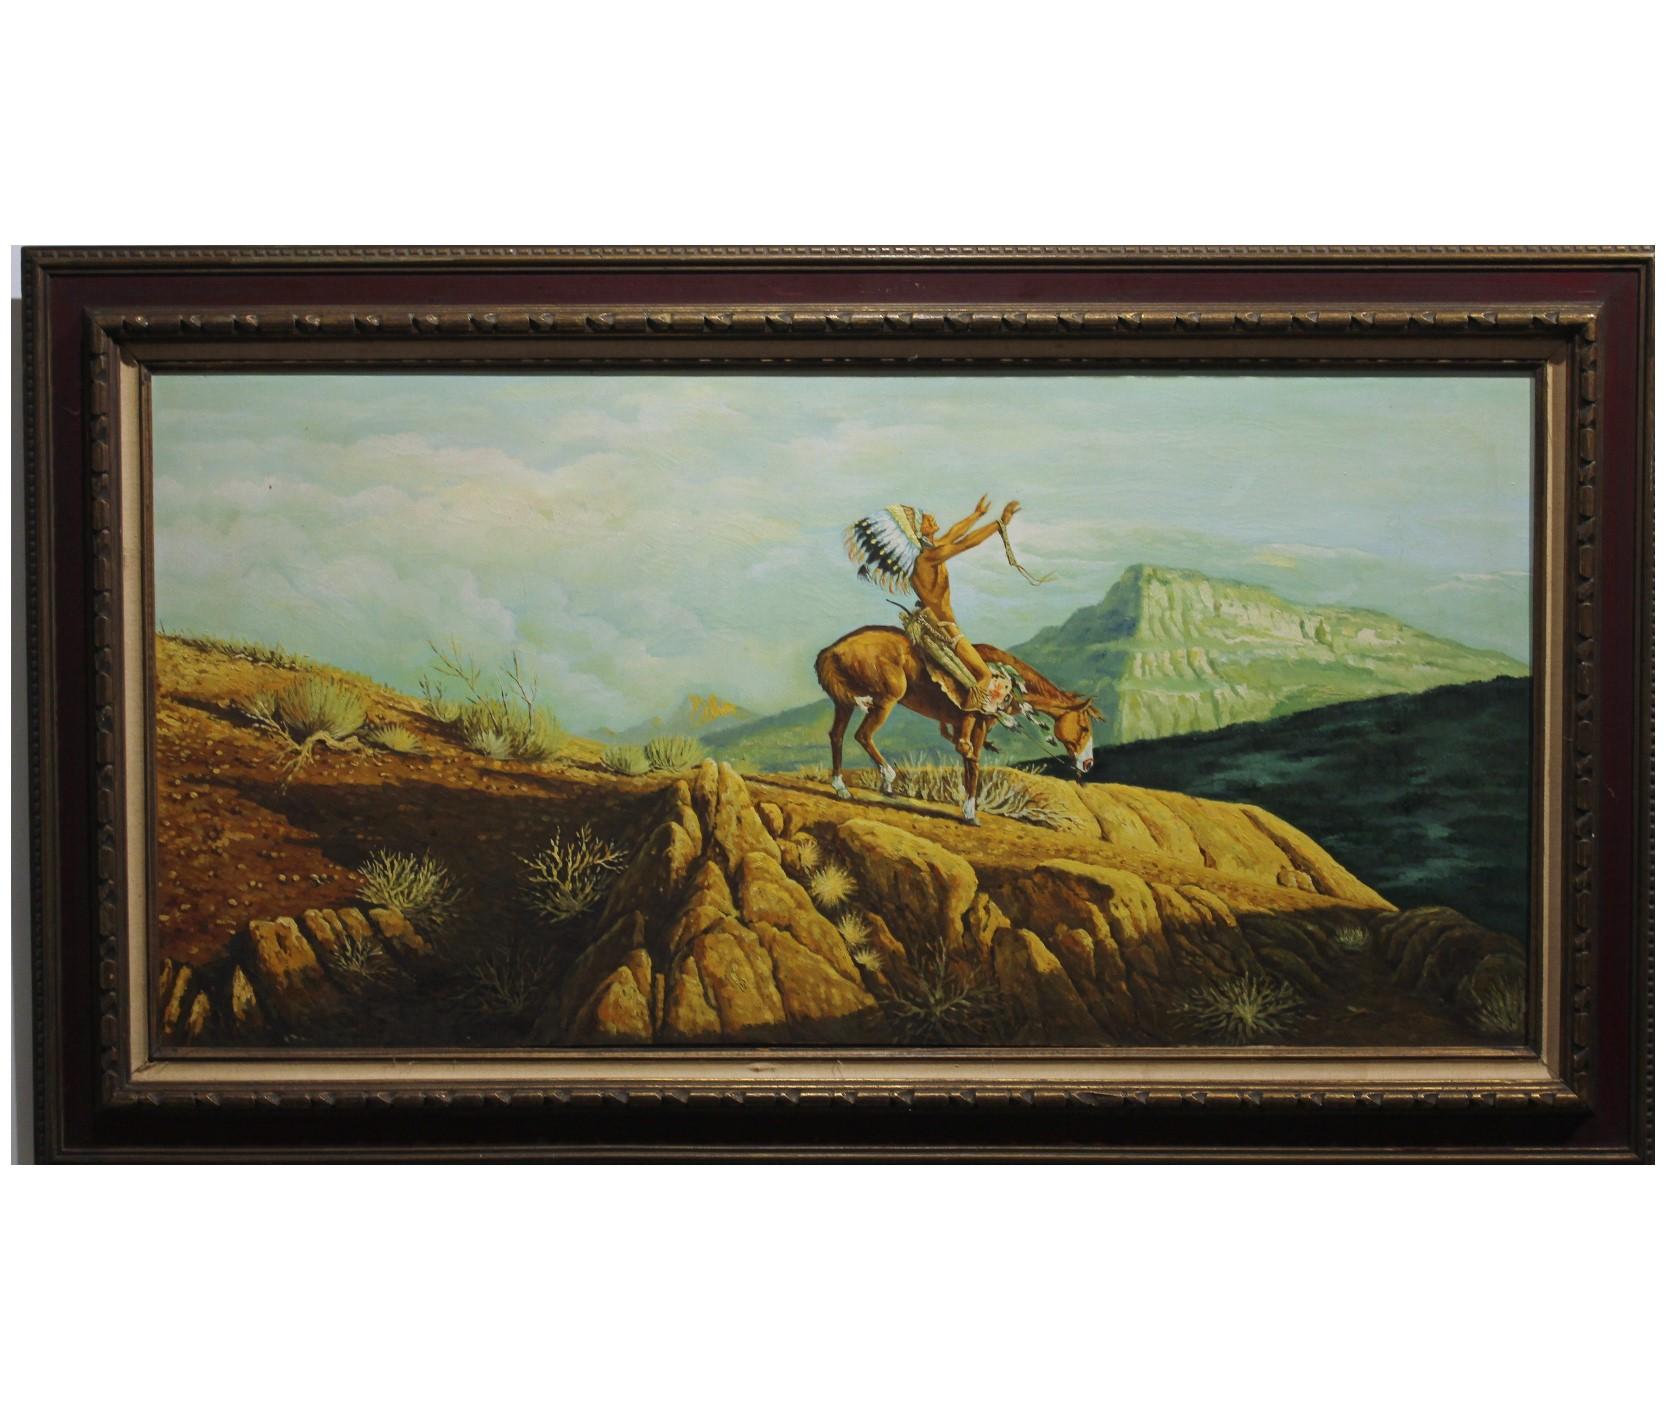 Jackson Landscape Painting - Landscape with Native American in Prayer on a Horse